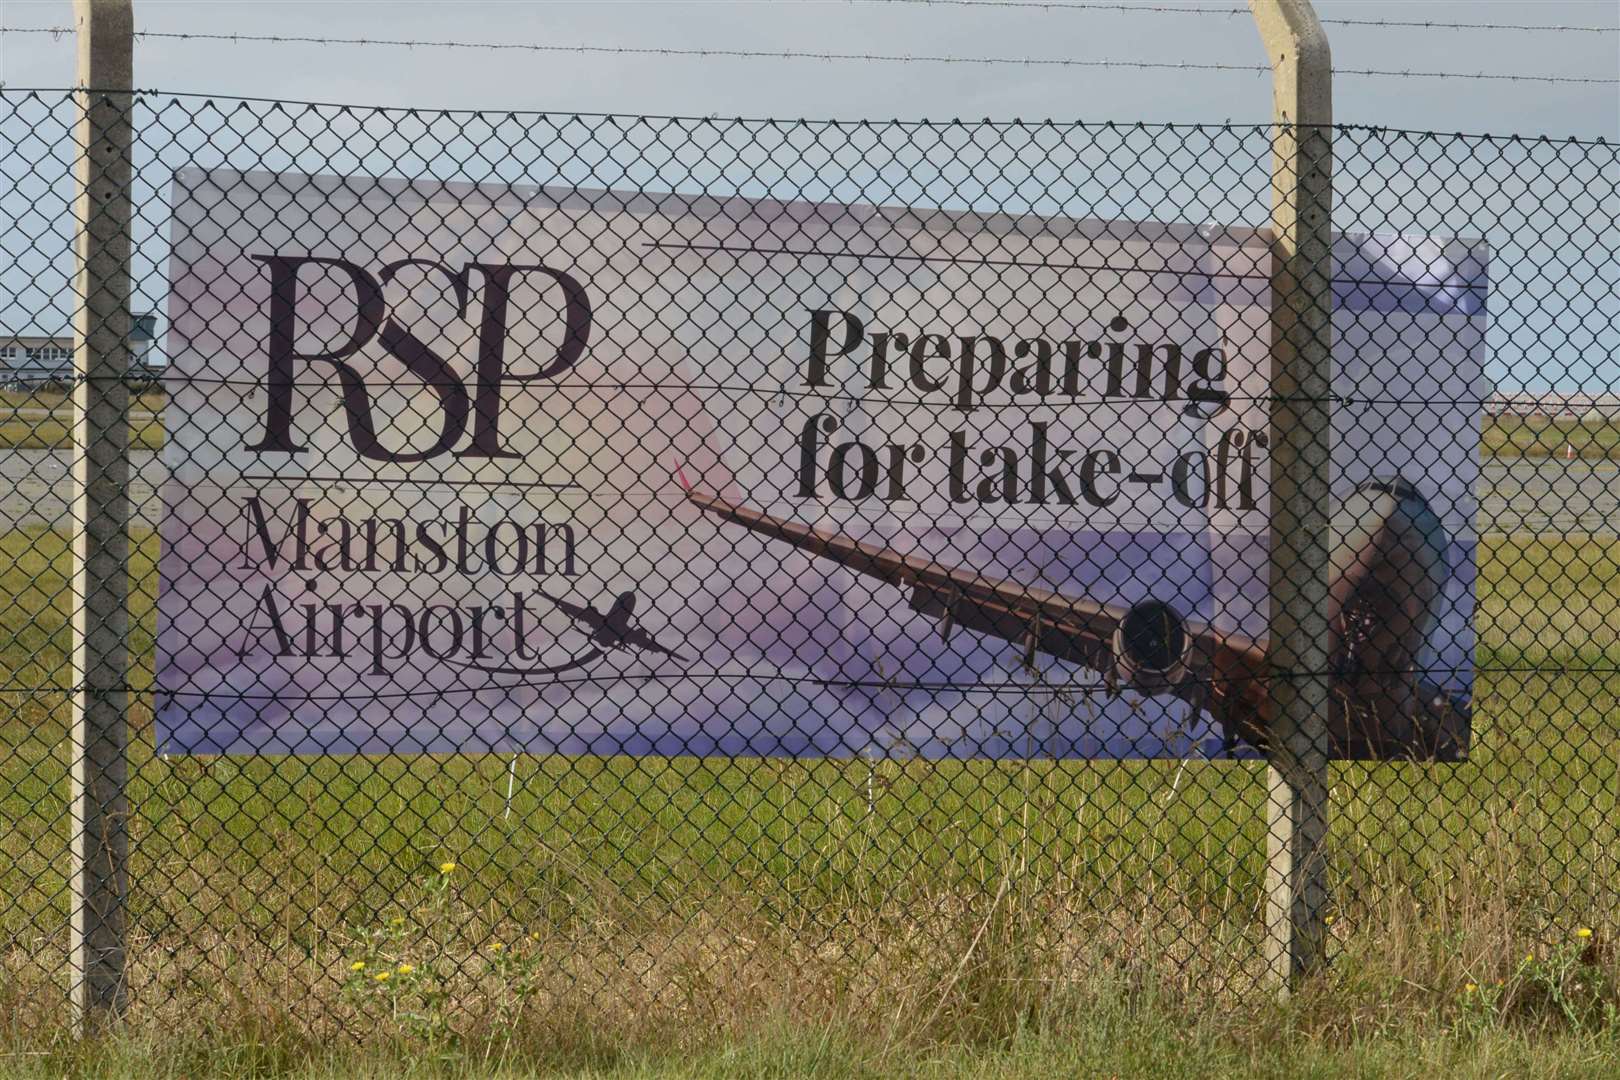 The long-running saga of Manston Airport looks set to continue into 2021